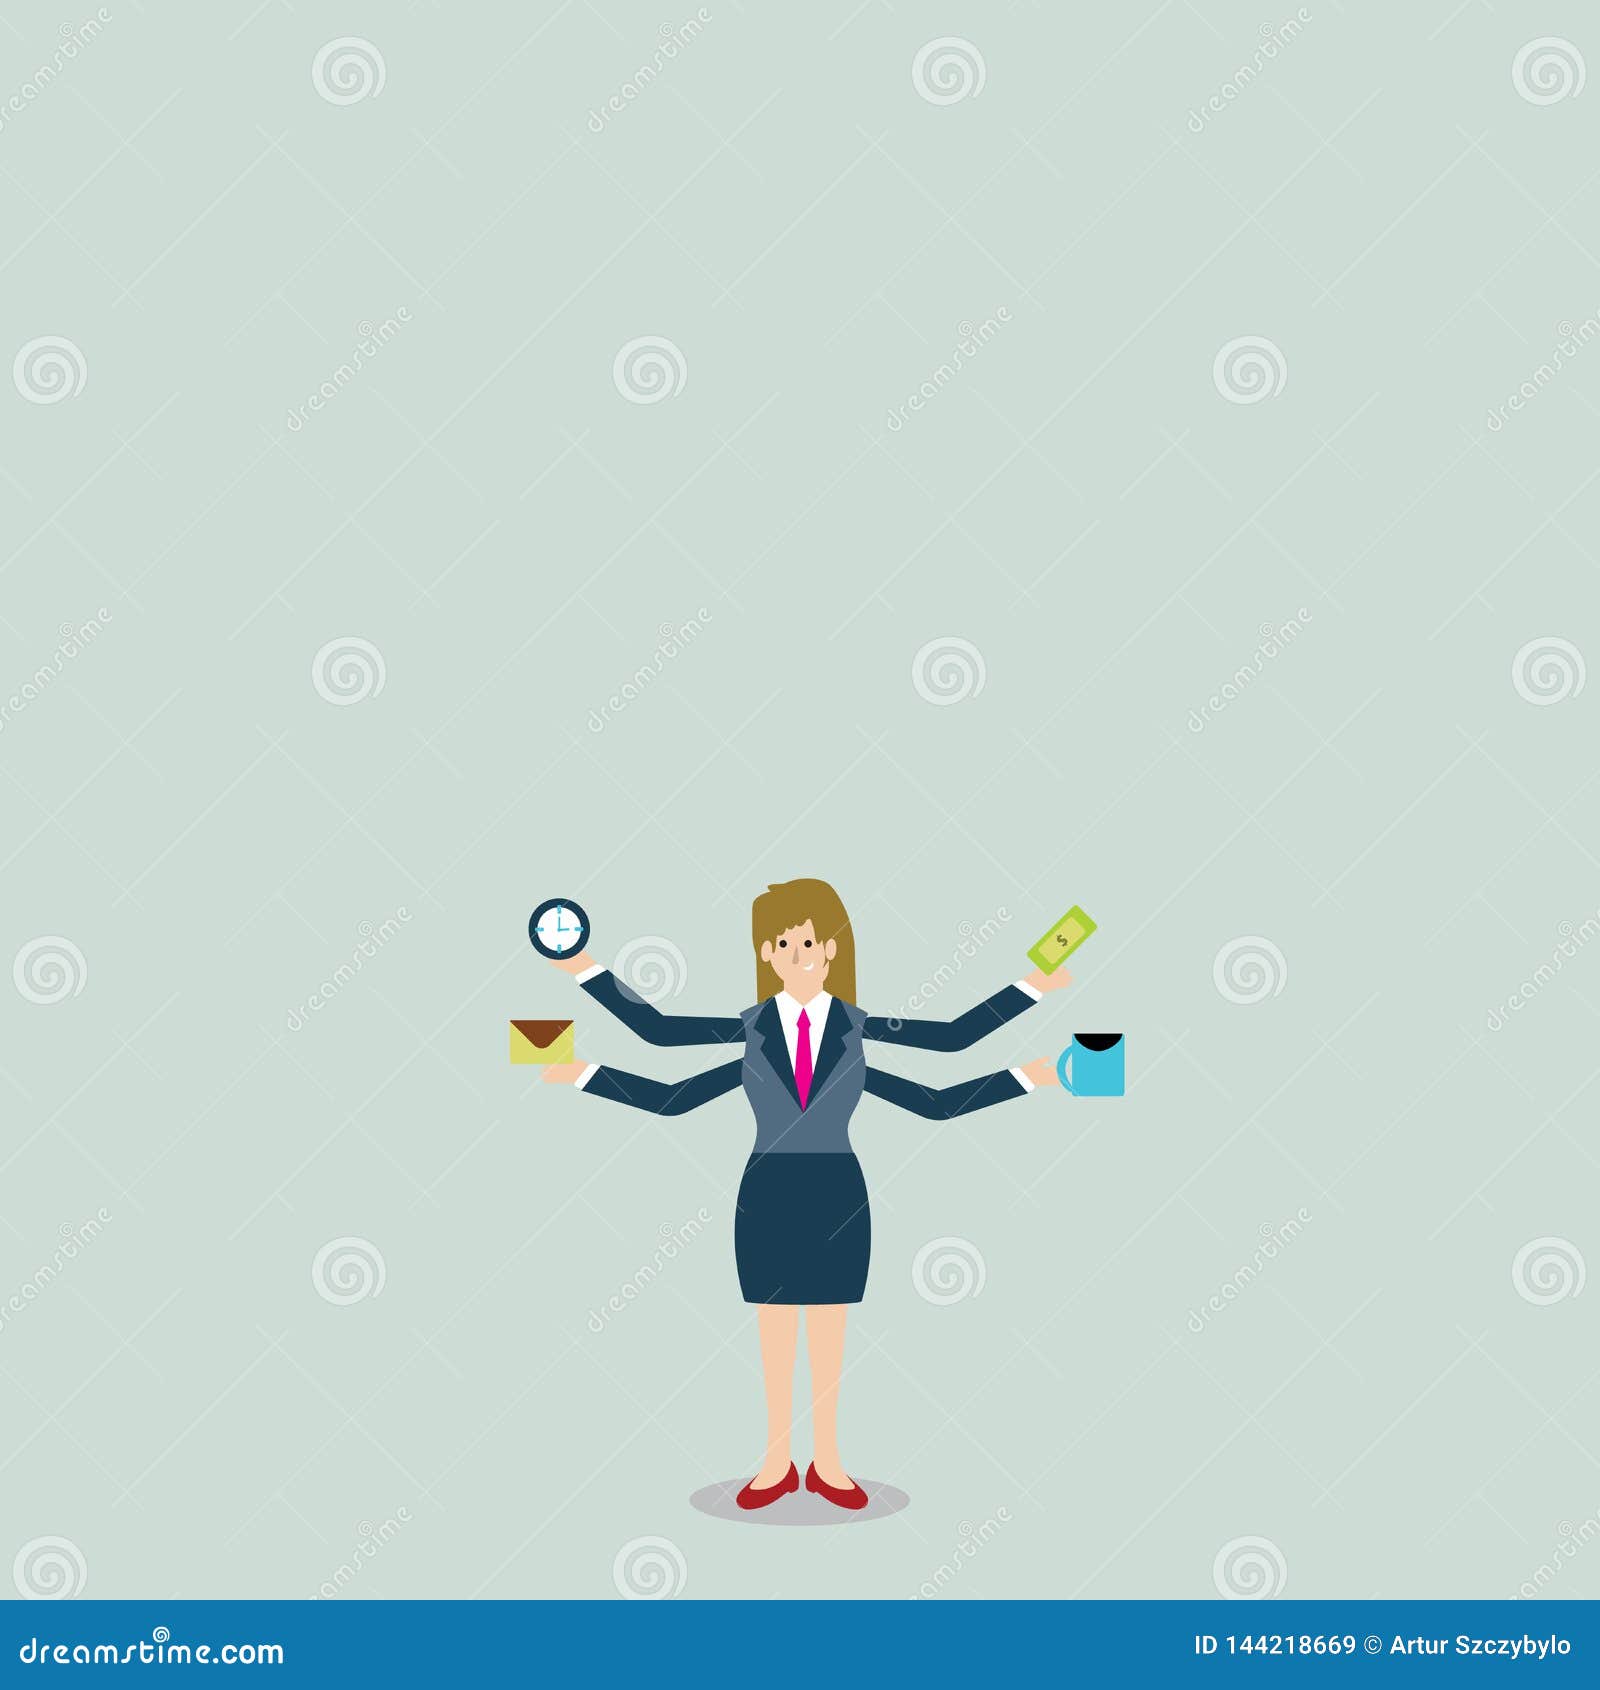 Woman in Business Suit Standing with Four Arms Exending Sideways